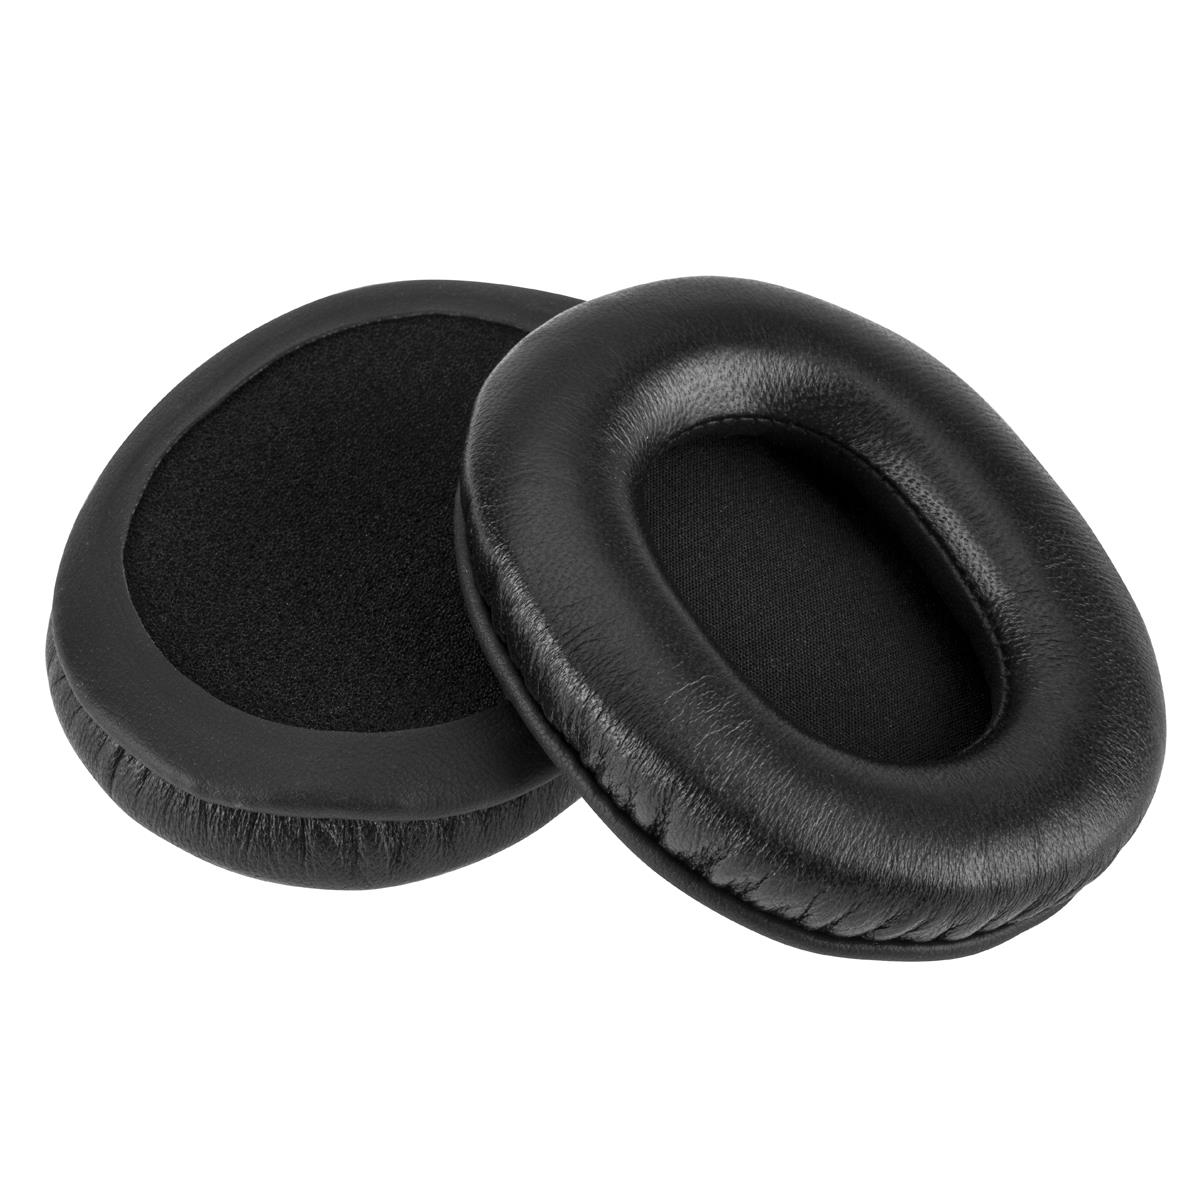 Image of H&amp;A Genuine Sheepskin Leather Earpads for Audio Technica ATH-M50 Headphones